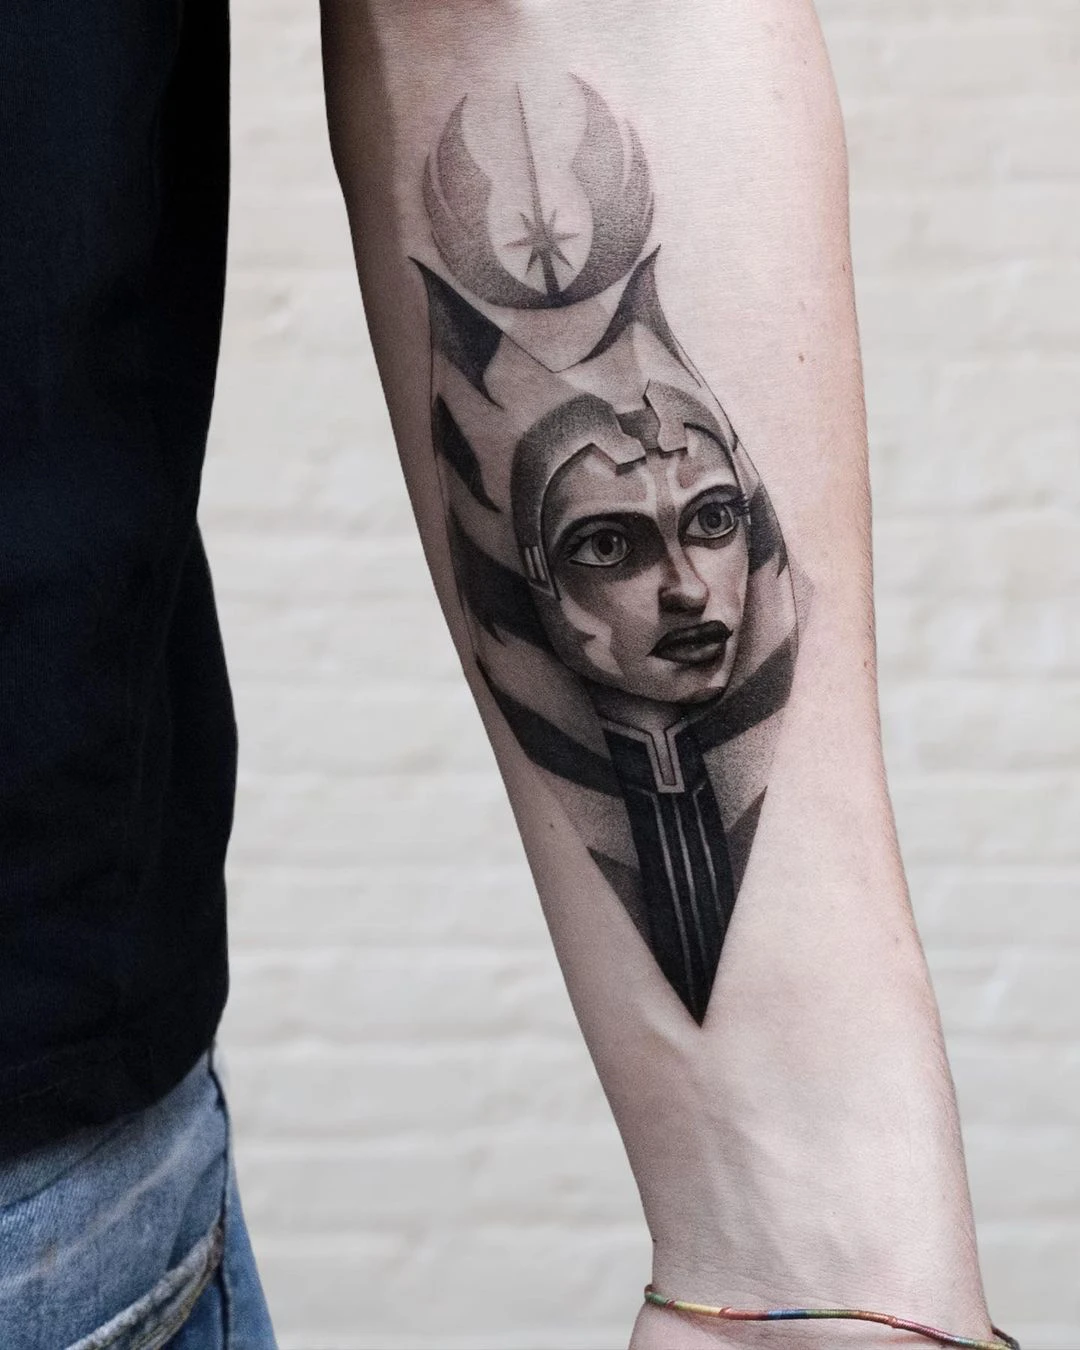 So stoked I finally got to tattoo an Ahsoka Tano Going to add more Clone  Wars characters around her next time Thank you Jim  Instagram